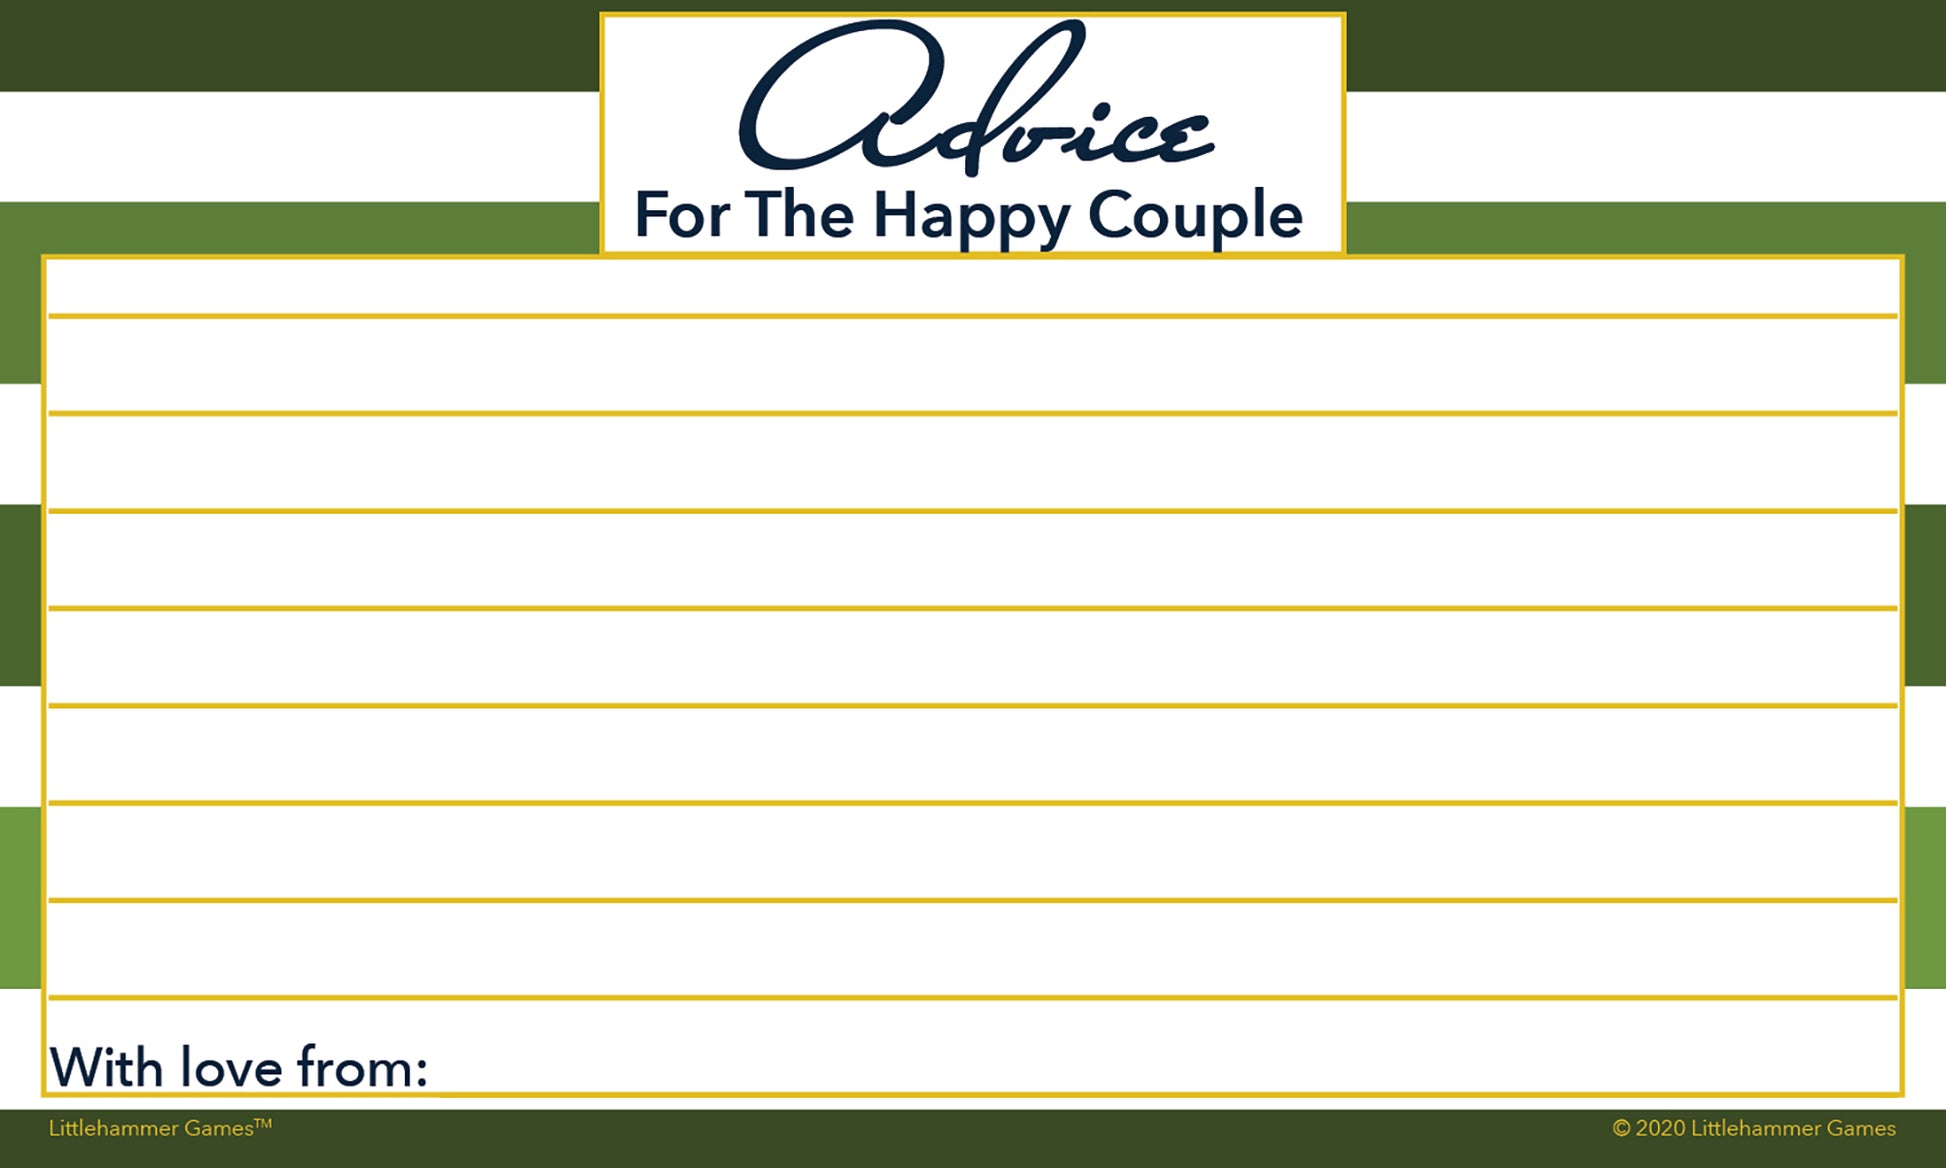 Green-striped Advice for the Happy Couple cards